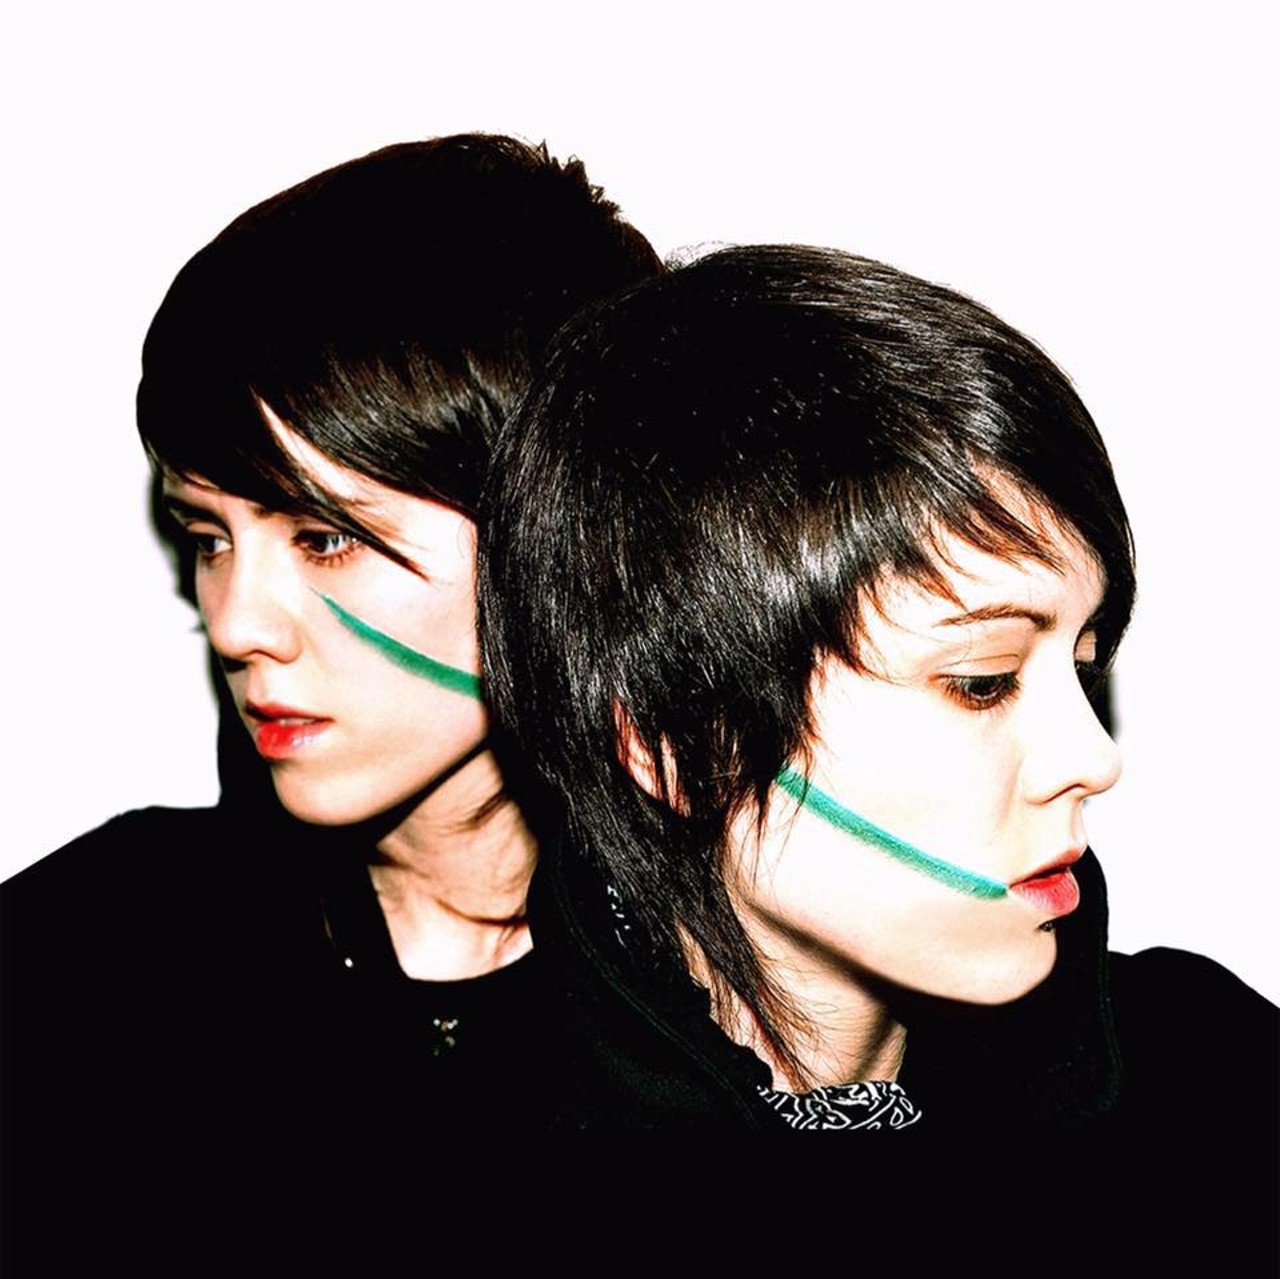 Tegan and Sara are a canadian indie pop band. These identical twin sisters come to Detroit at the Masonic Temple Nov. 5. Doors open at 7 p.m. Photo courtesy of Facebook.